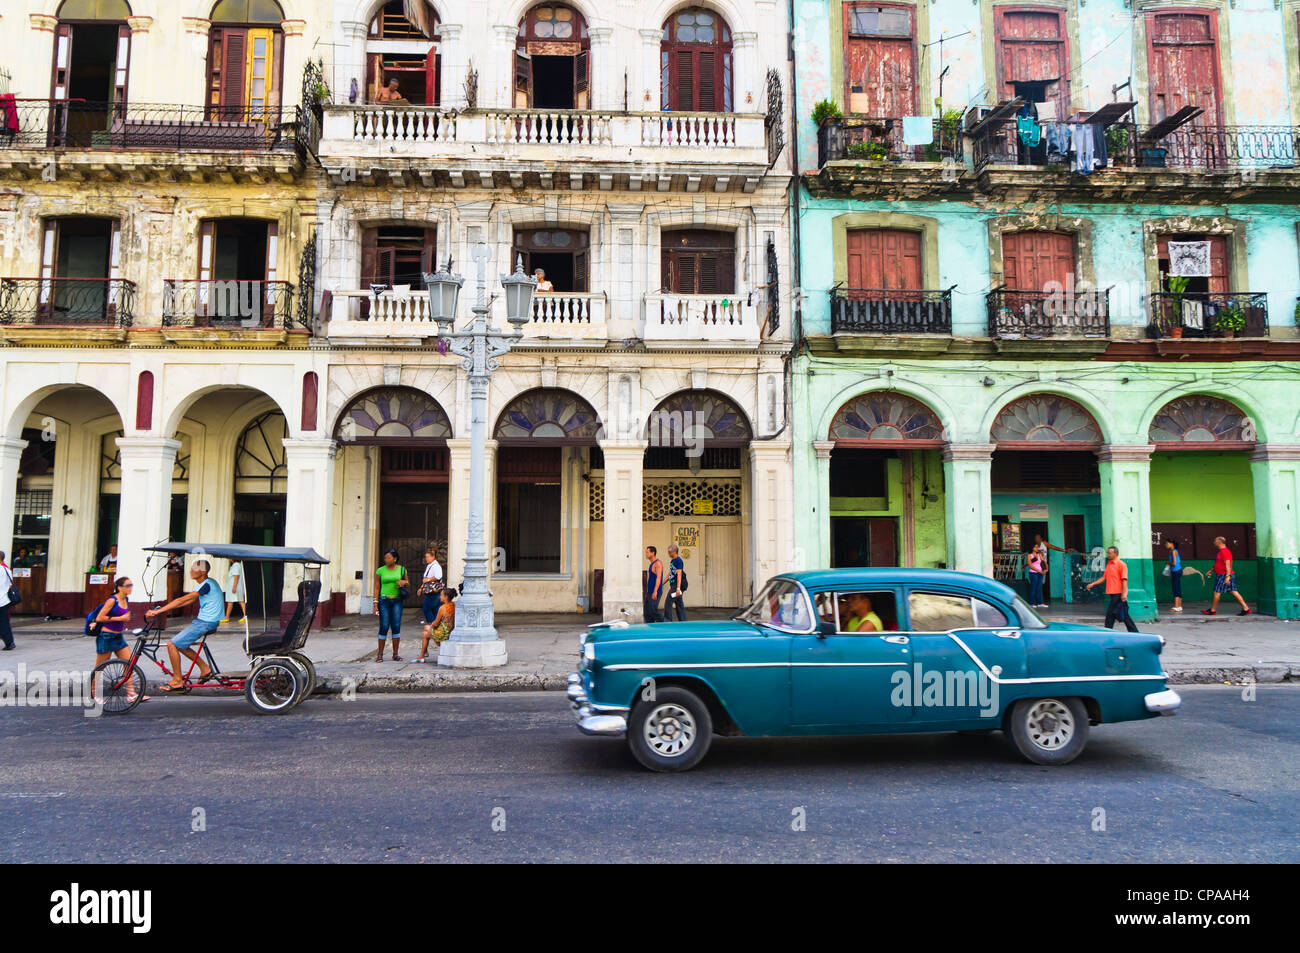 Havana, Cuba. Street scene with old car and worn out buildings. Stock Photo